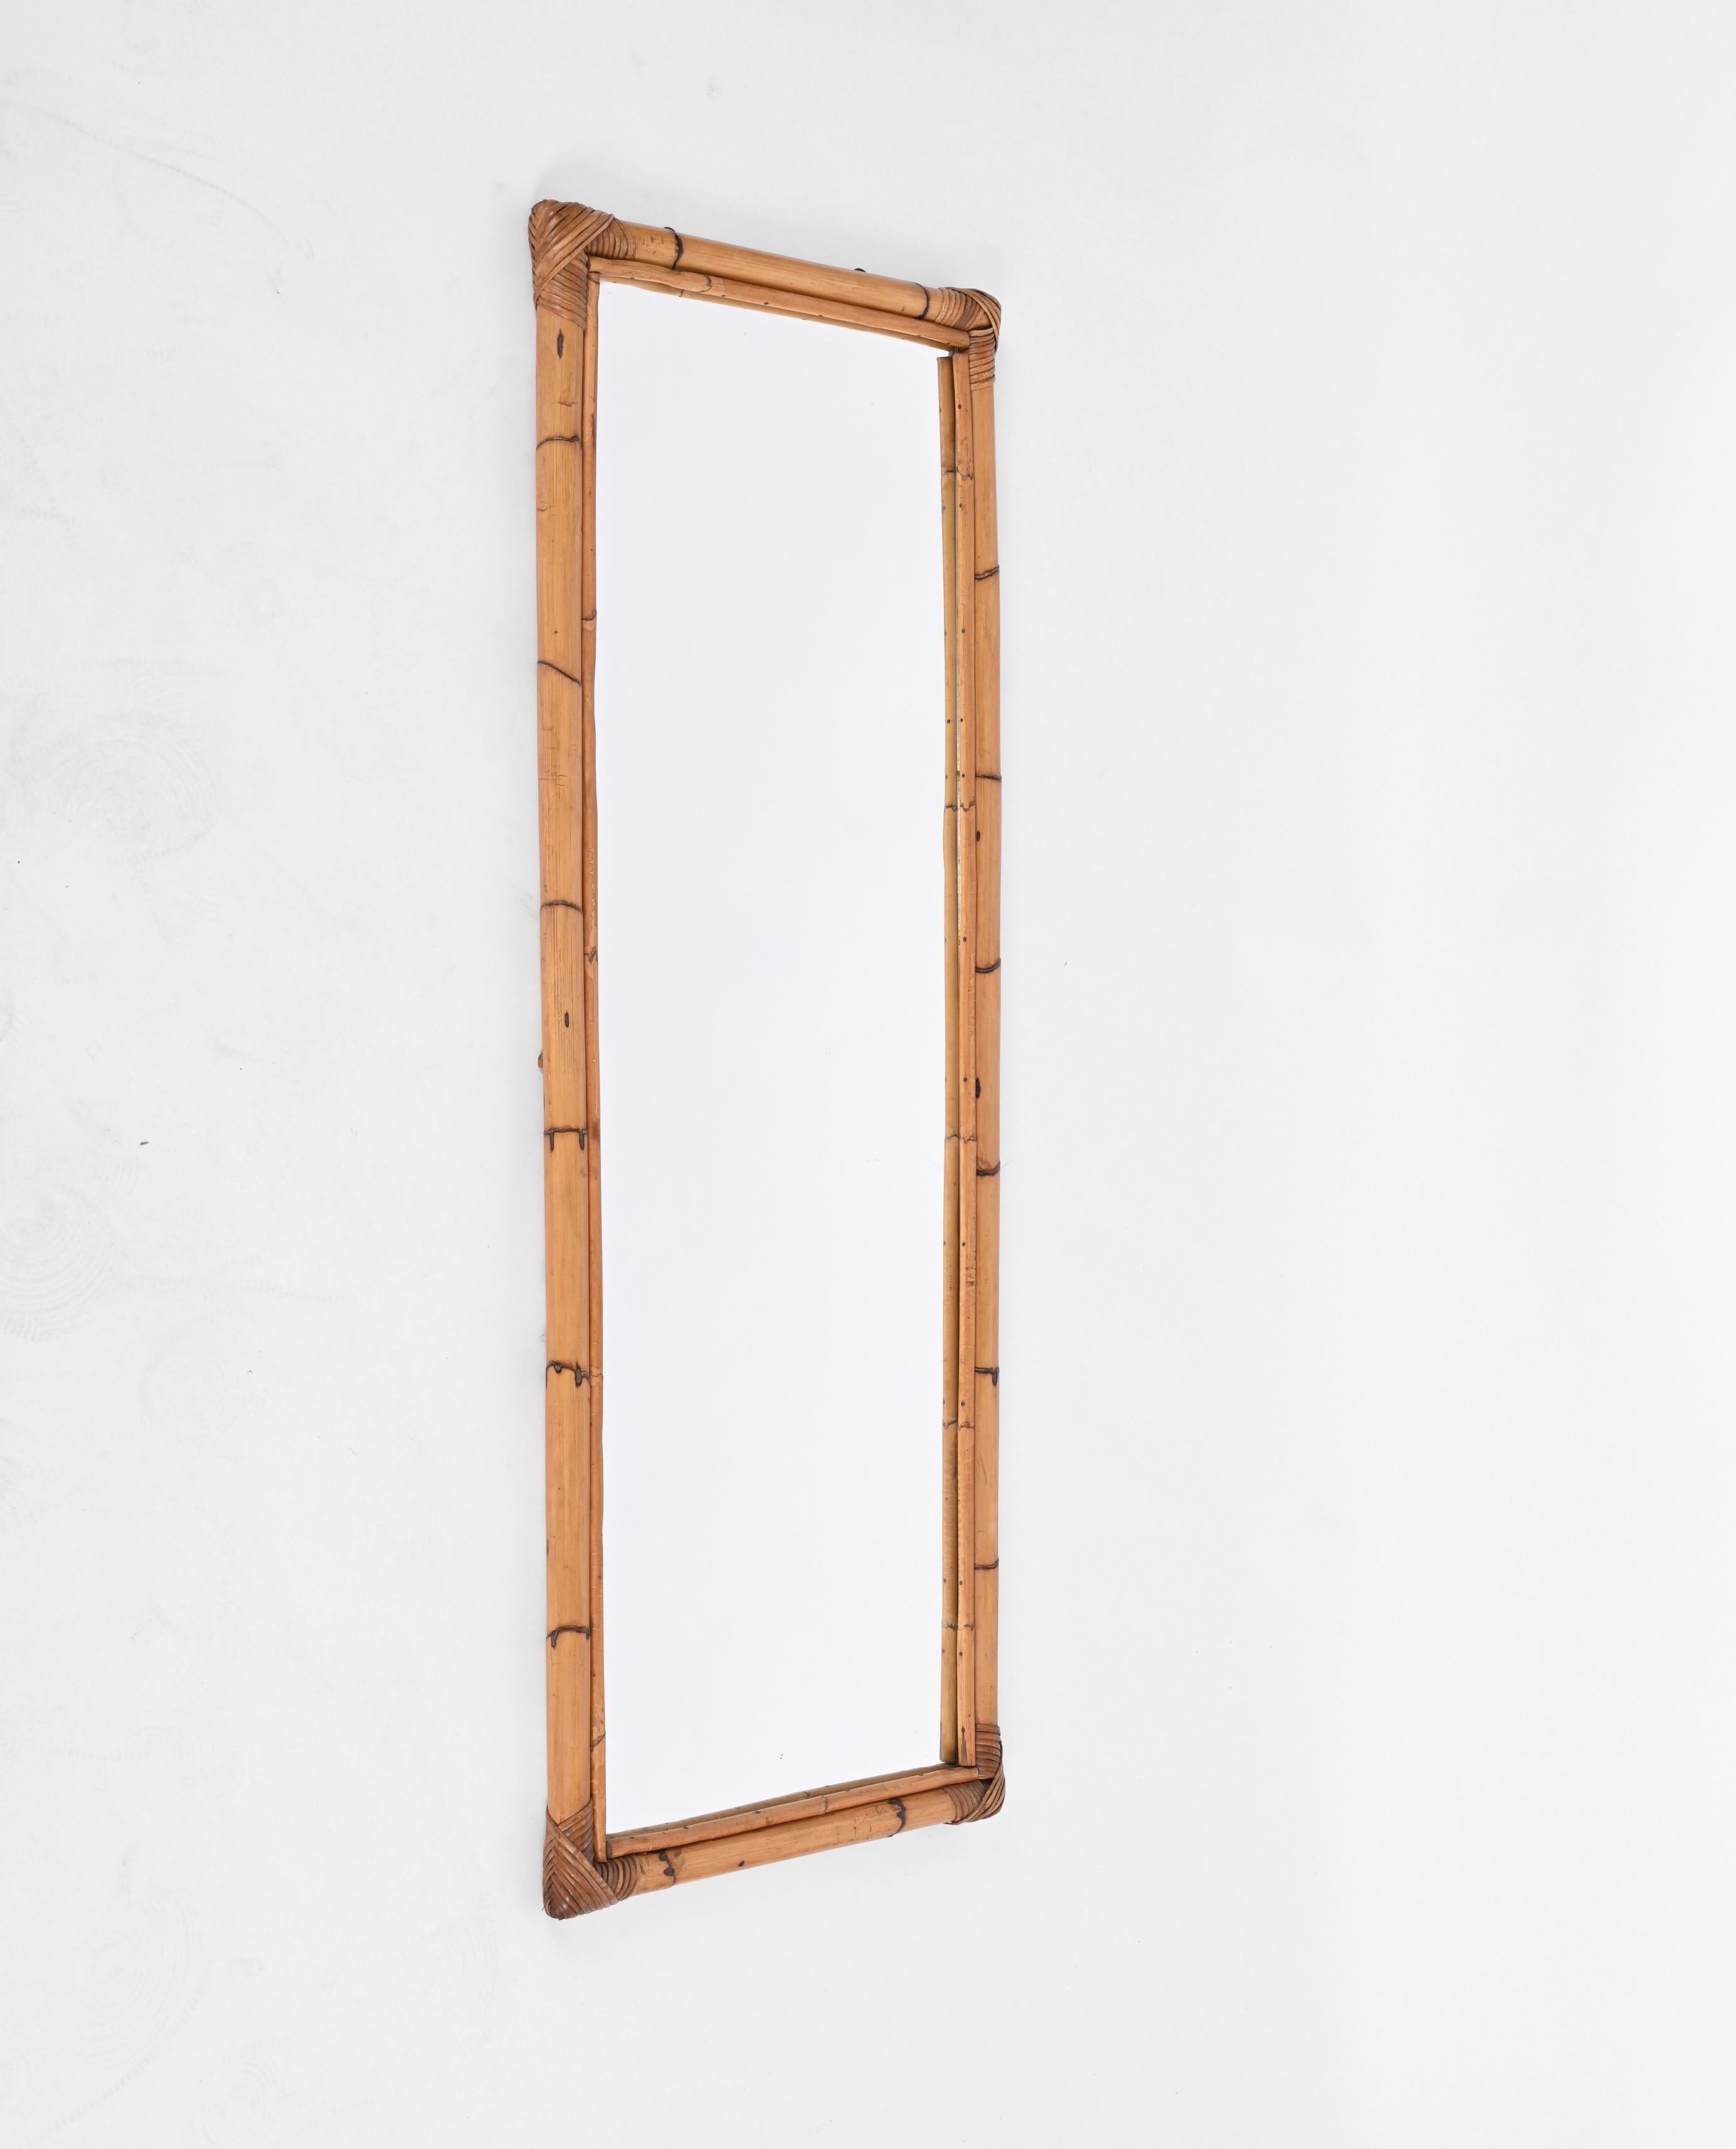 Italian Midcentury Rectangular Mirror with Bamboo and Rattan Frame, Italy 1970s